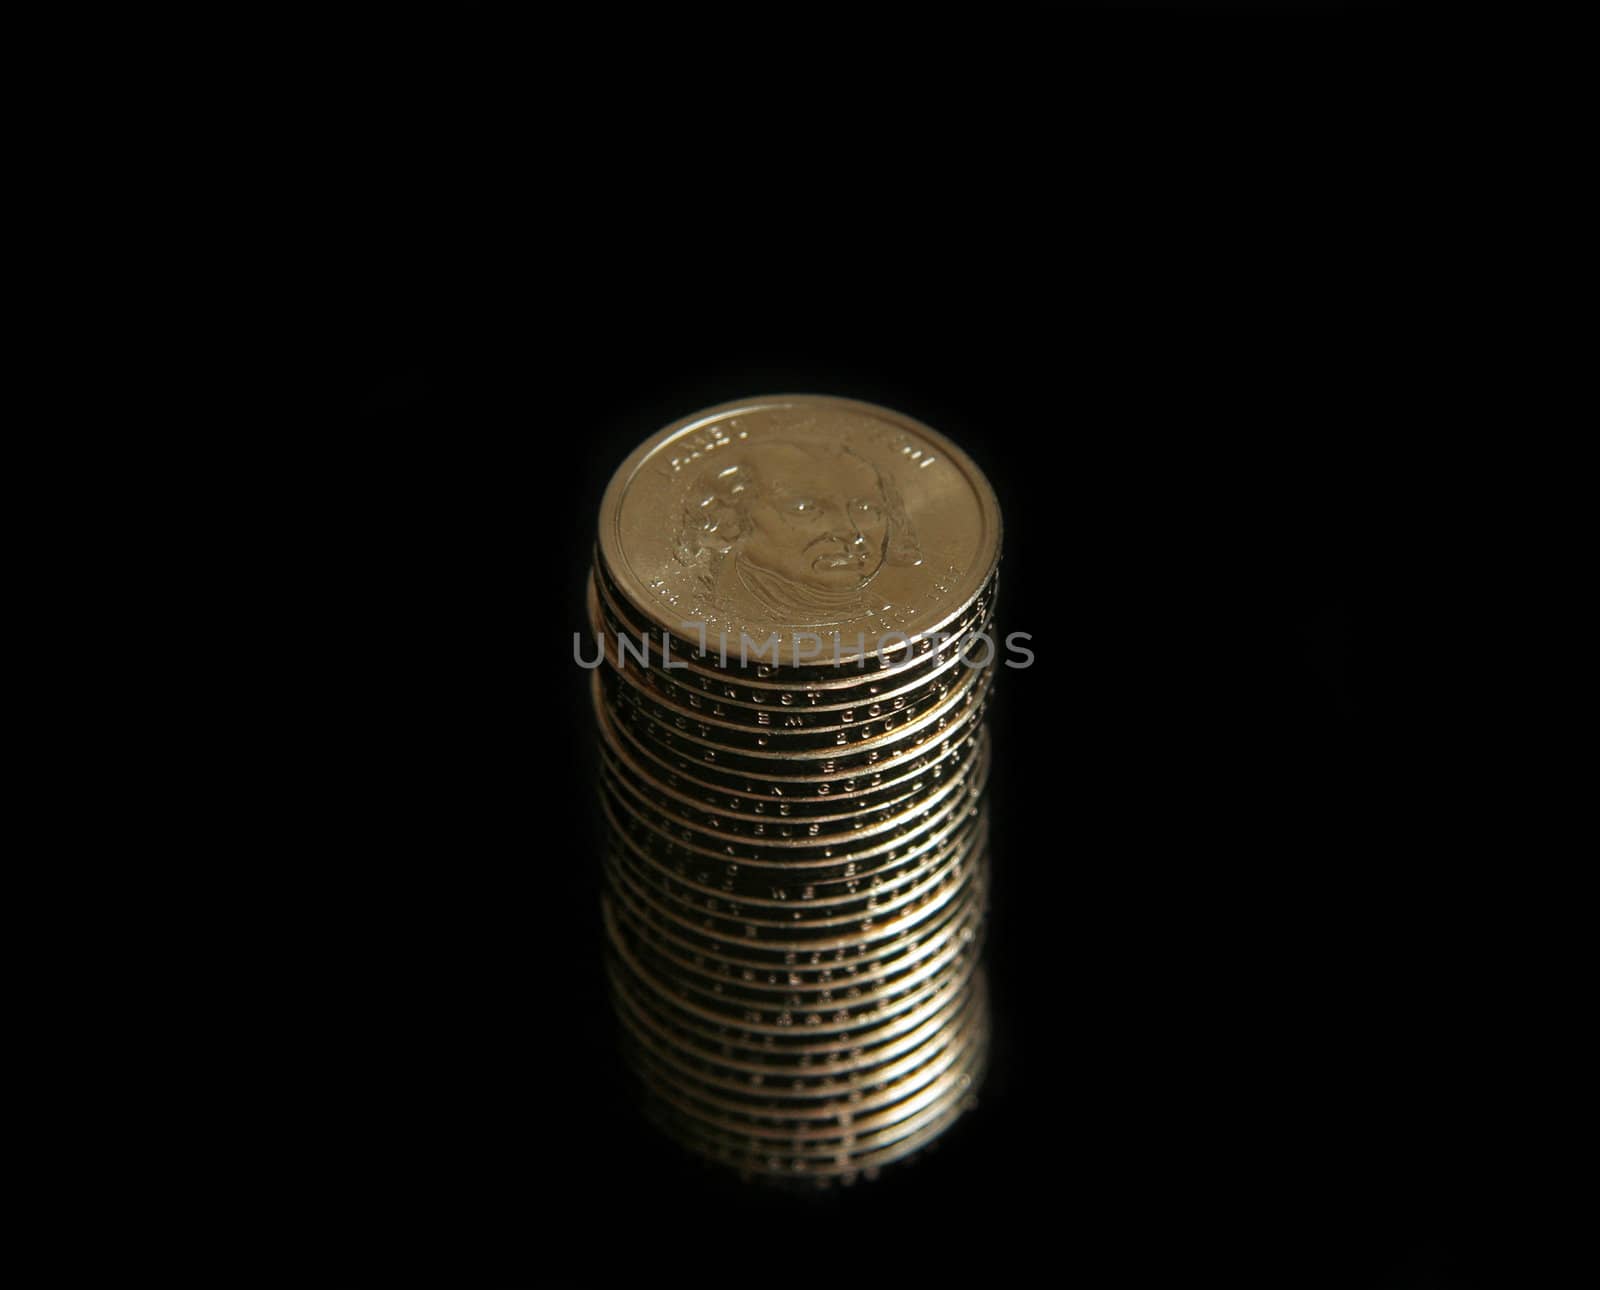 A single stack of gold U.S. one dollar coins